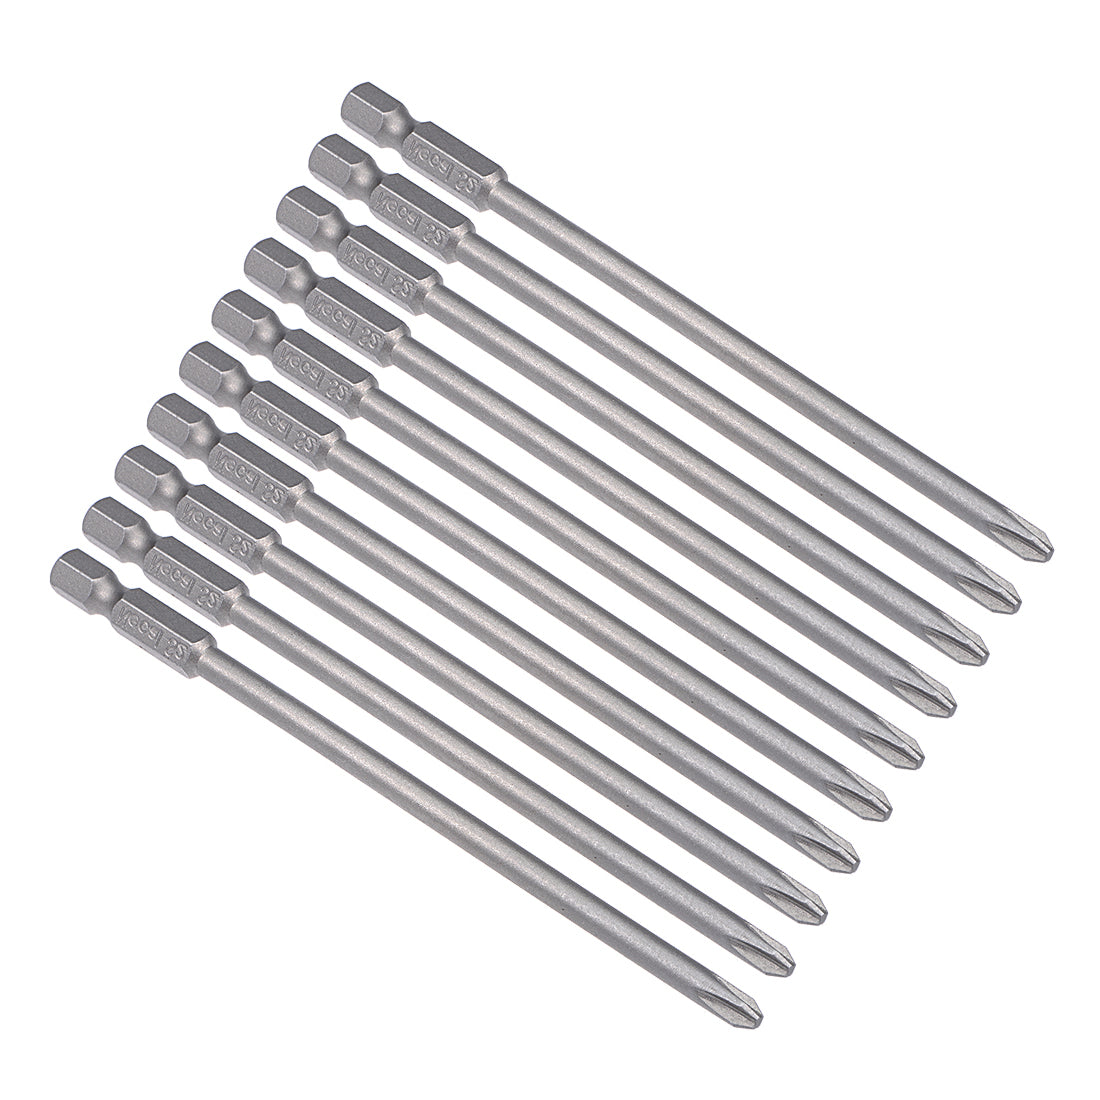 Uxcell Uxcell 10 Pcs H1/4 Shank 120mm Length 5mm Phillips PH2 Magnetic S2 Screwdriver Bits